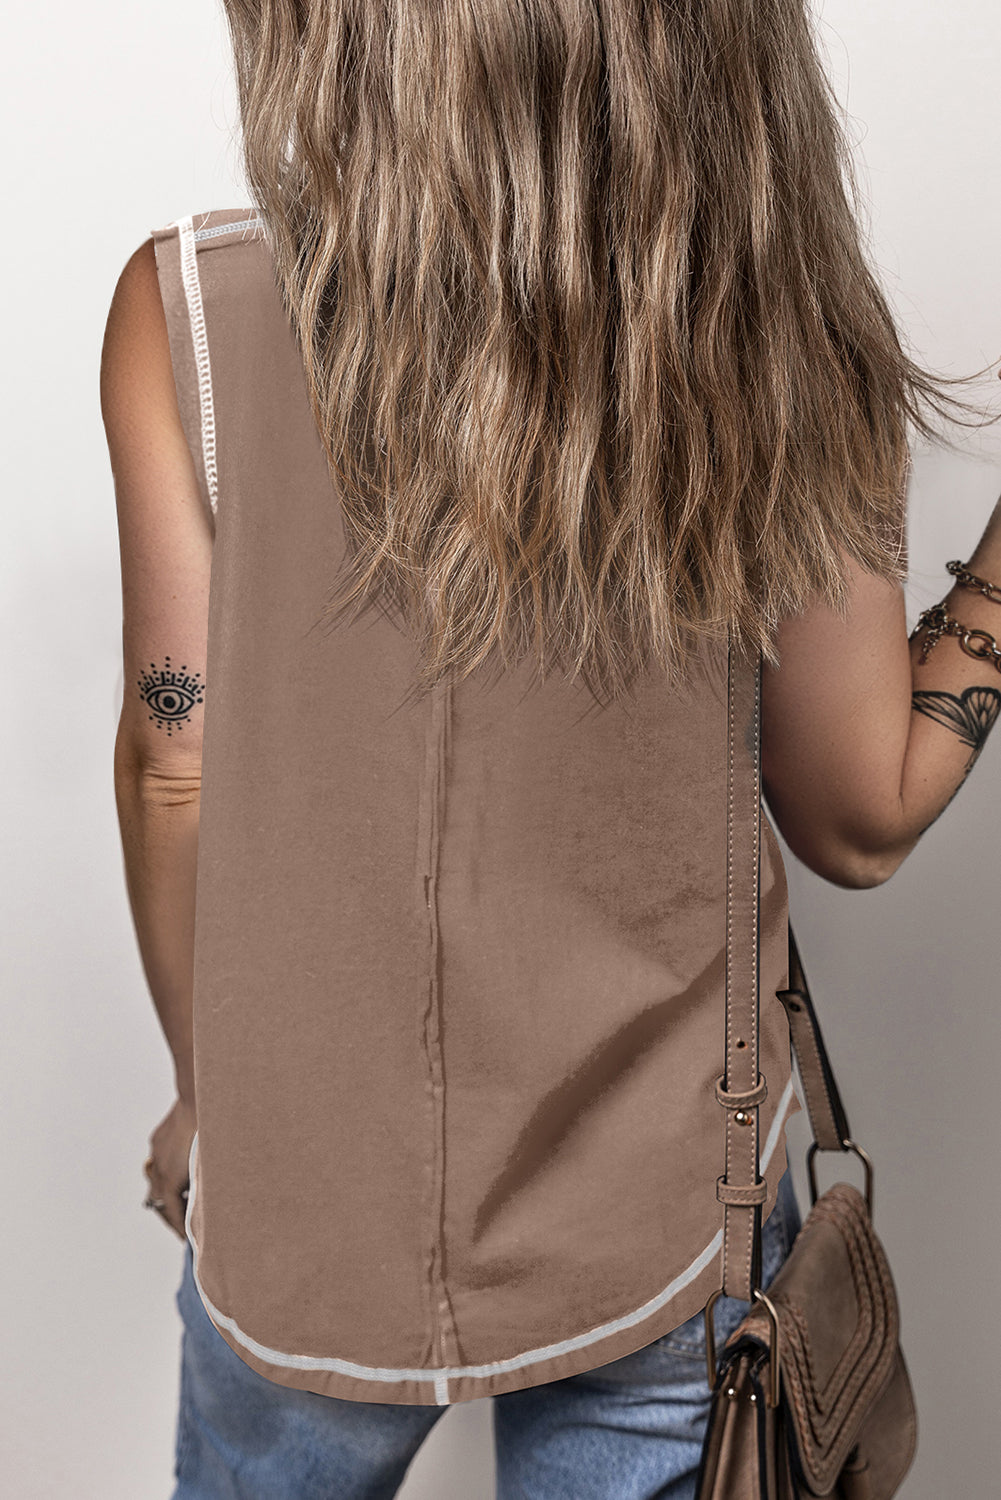 Contrast Stitching Exposed Seam Henley Tank Top